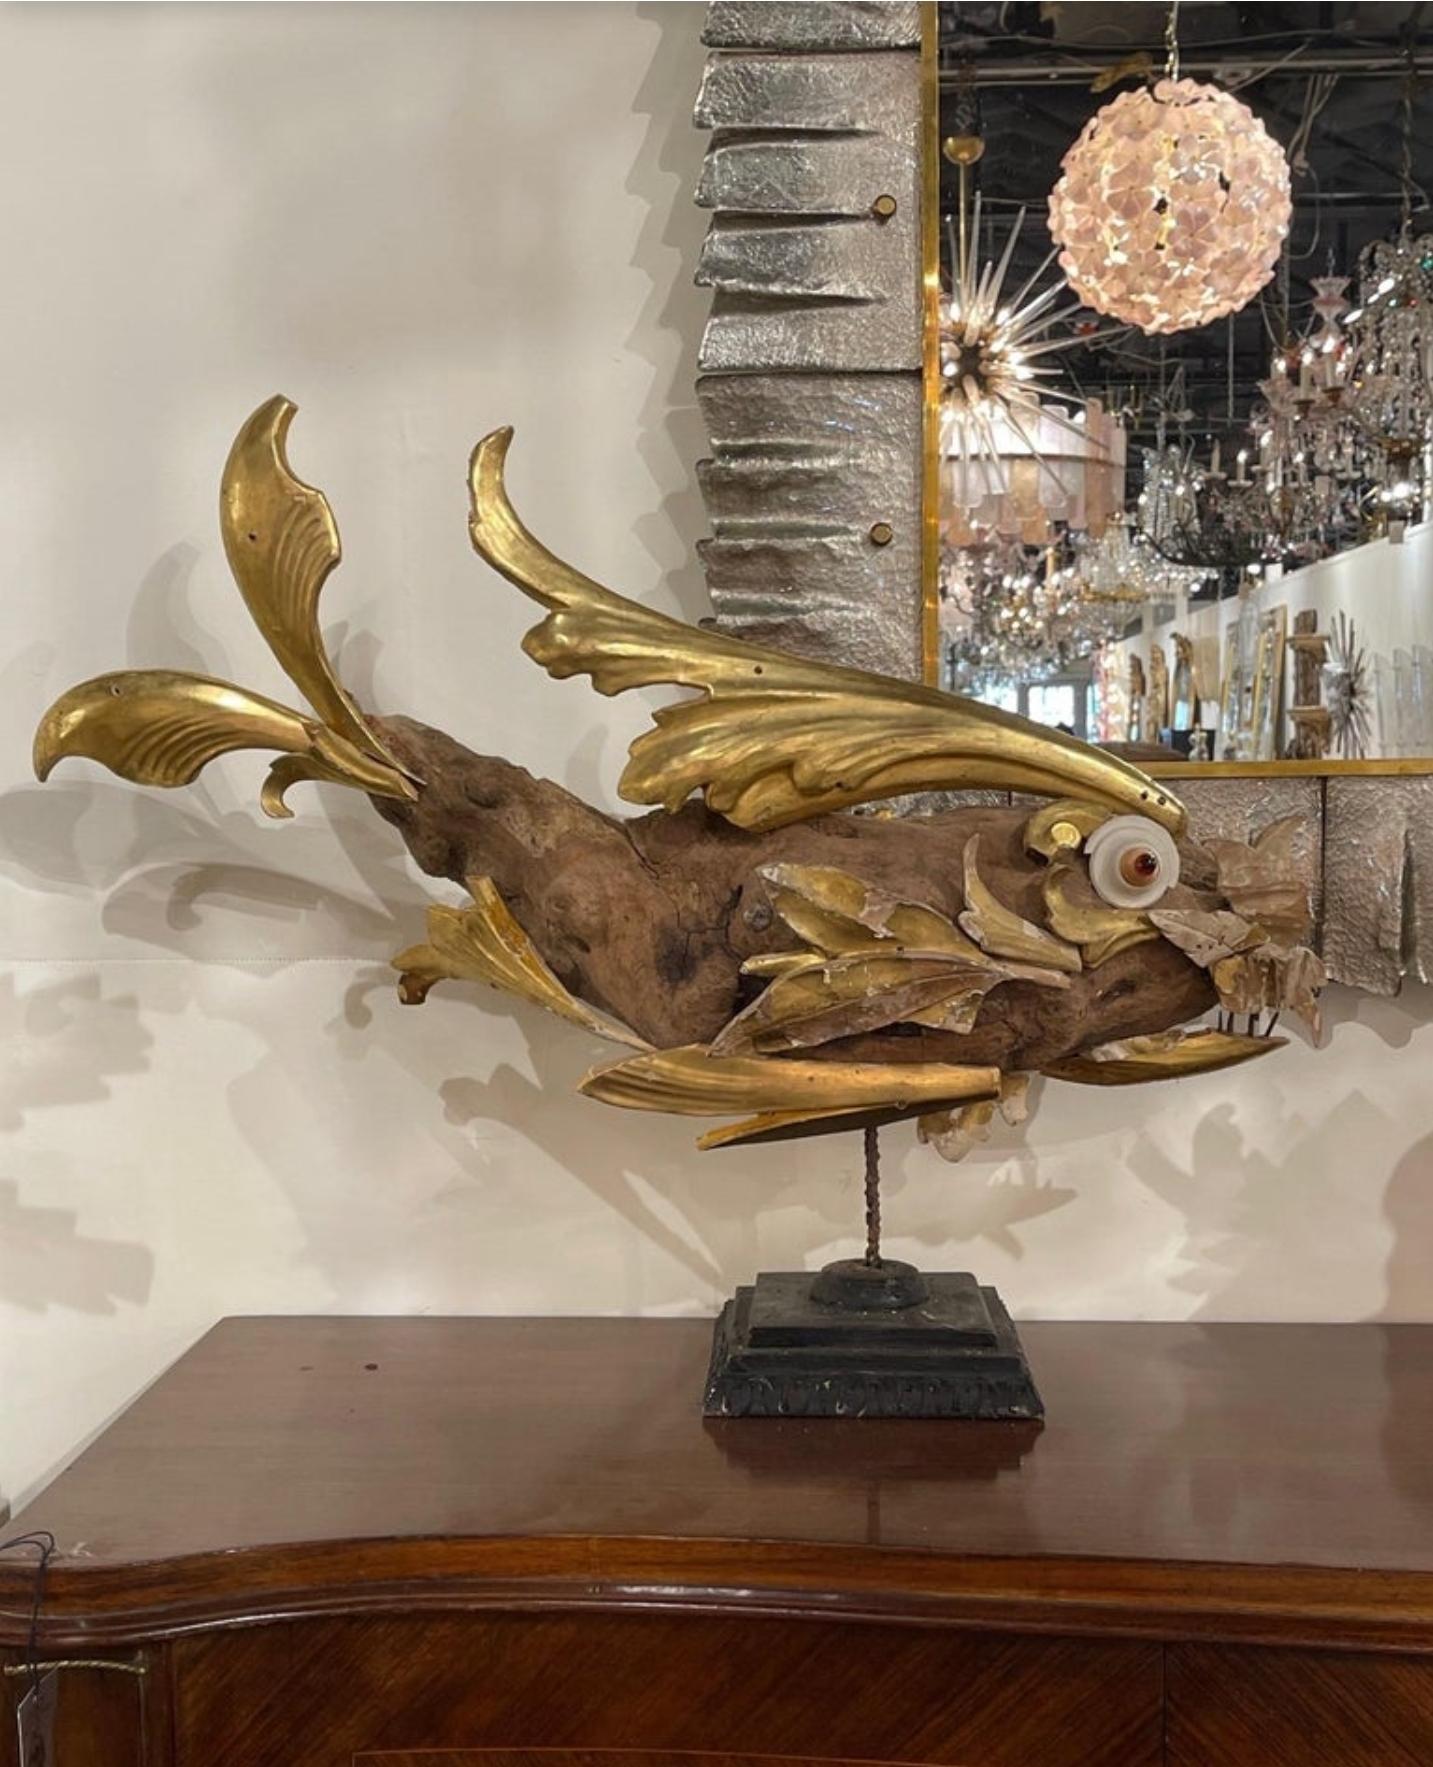 Italian Folk Art Fish Sculpture from 18th/19th Century Fragments Found Objects For Sale 4